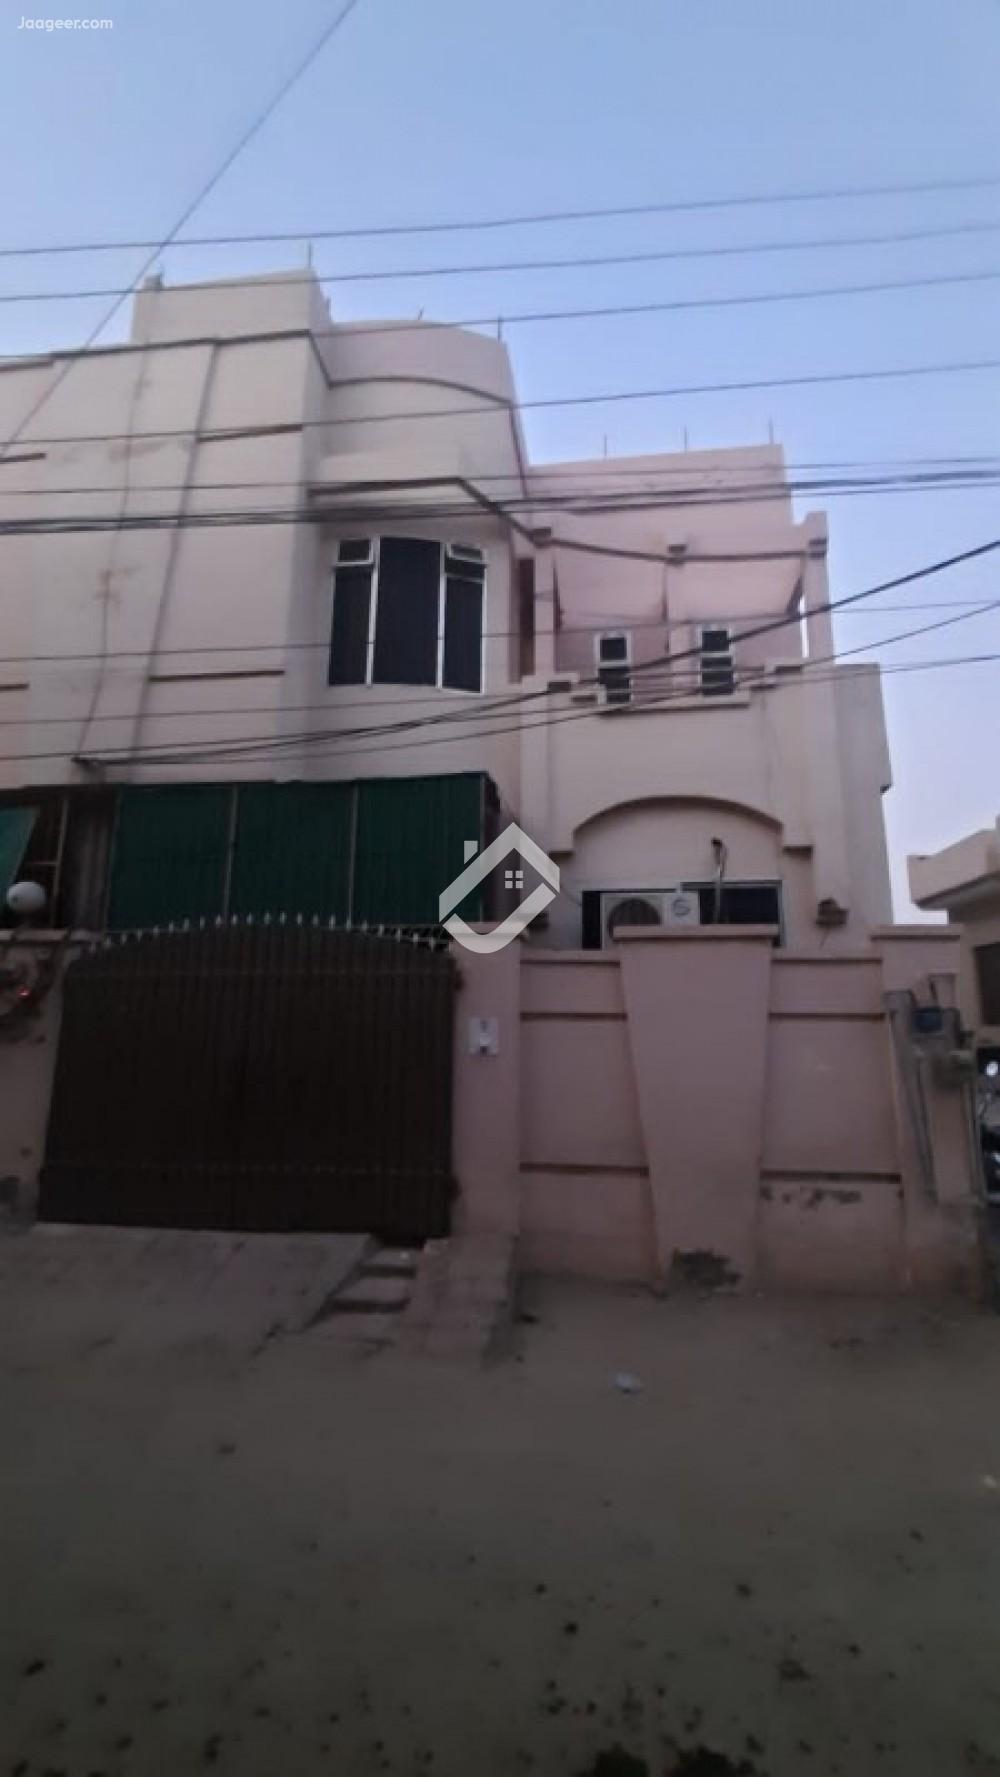 View  3.75 Marla Double Storey House For Sale  In Farooq Colony in Farooq Colony, Sargodha